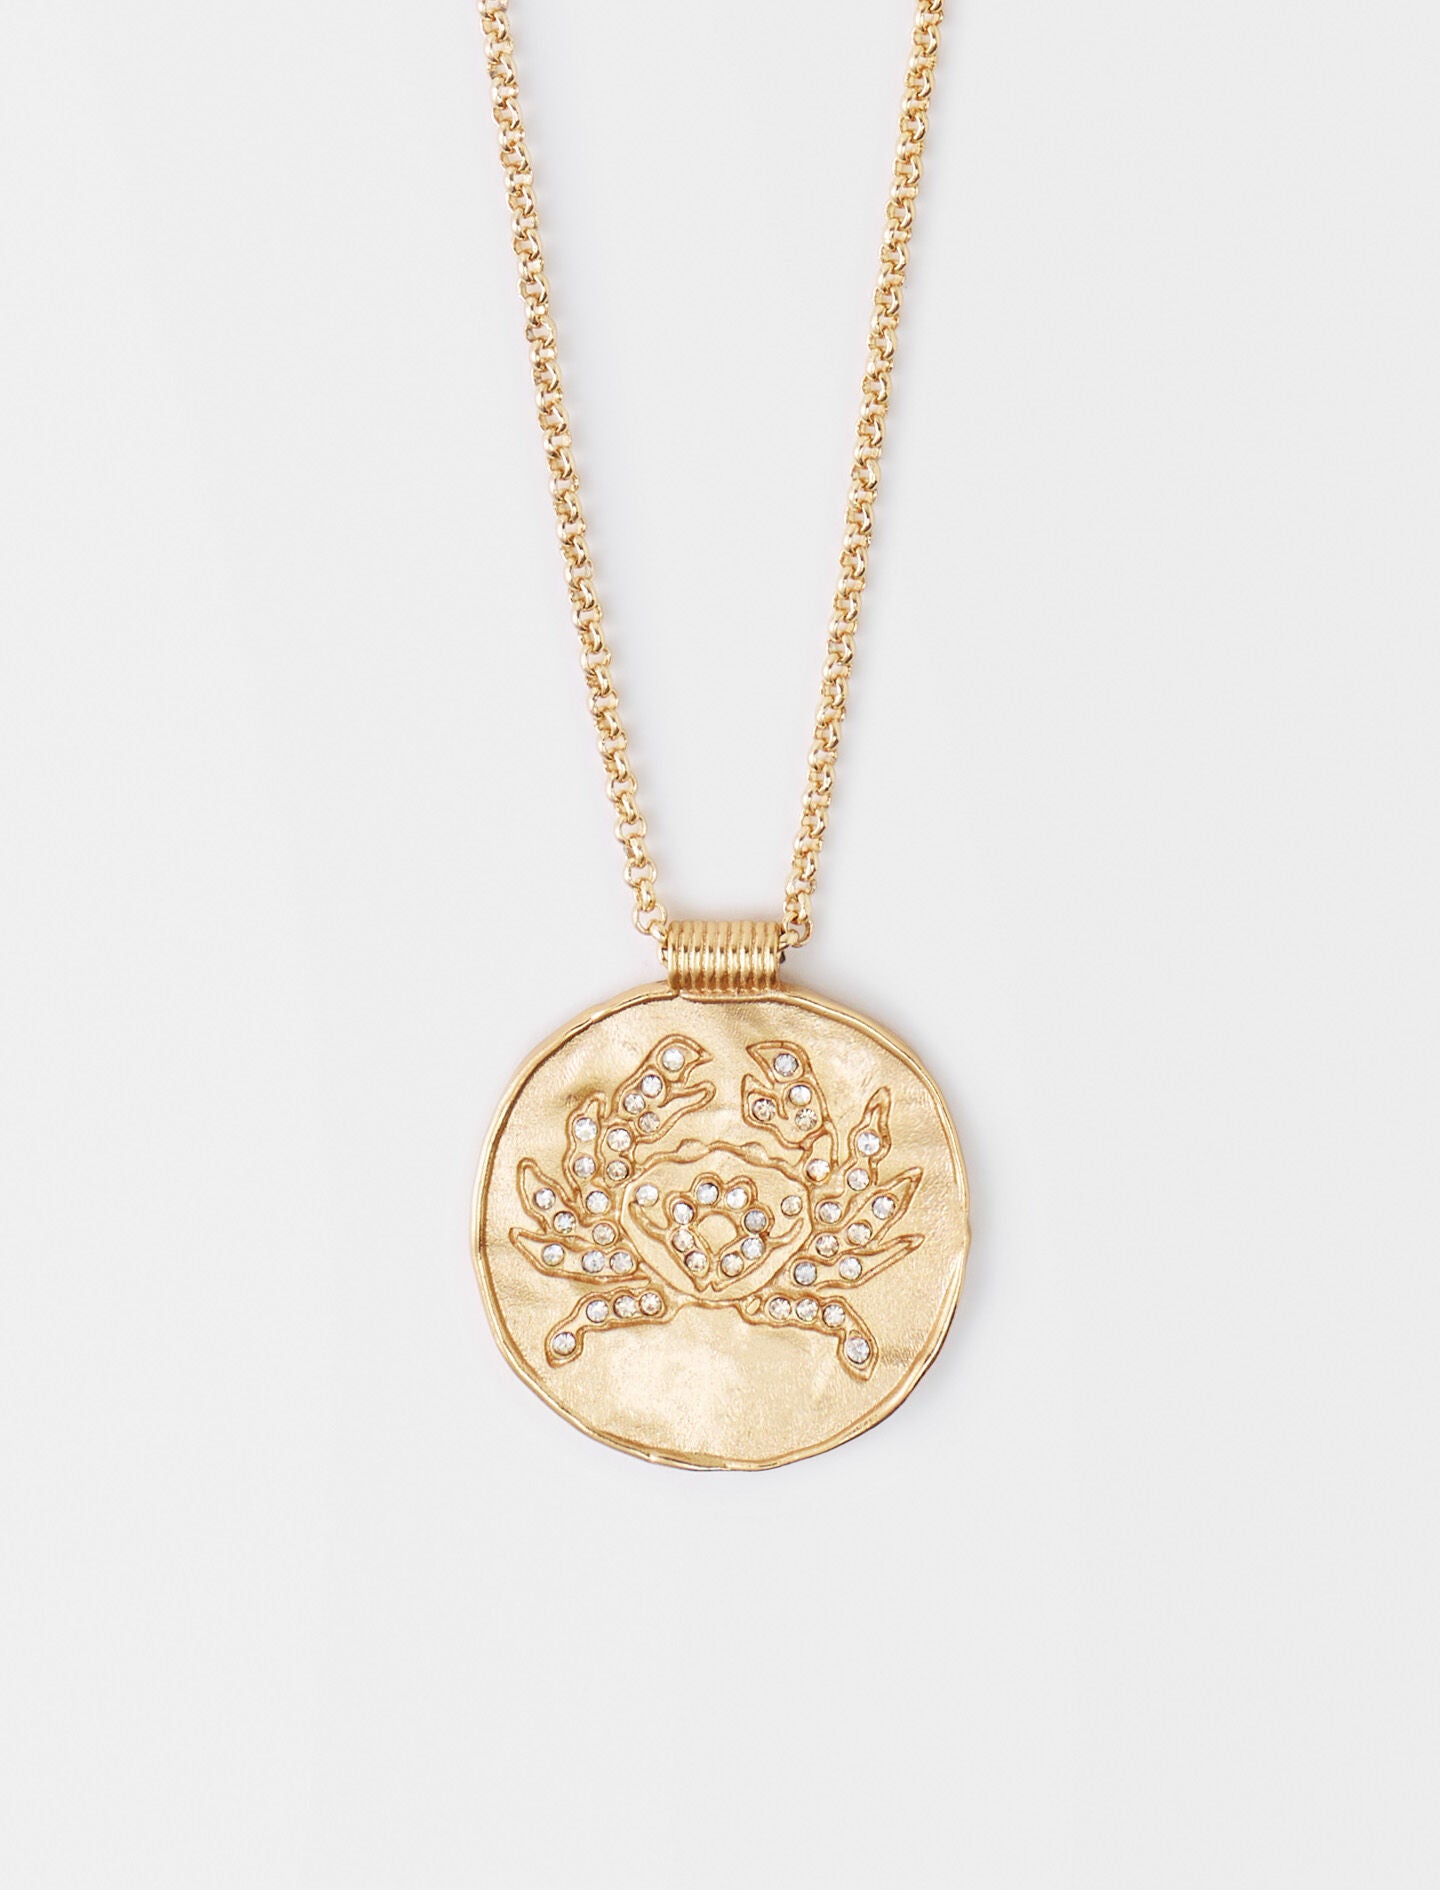 Cancer-featured- Cancer zodiac medal